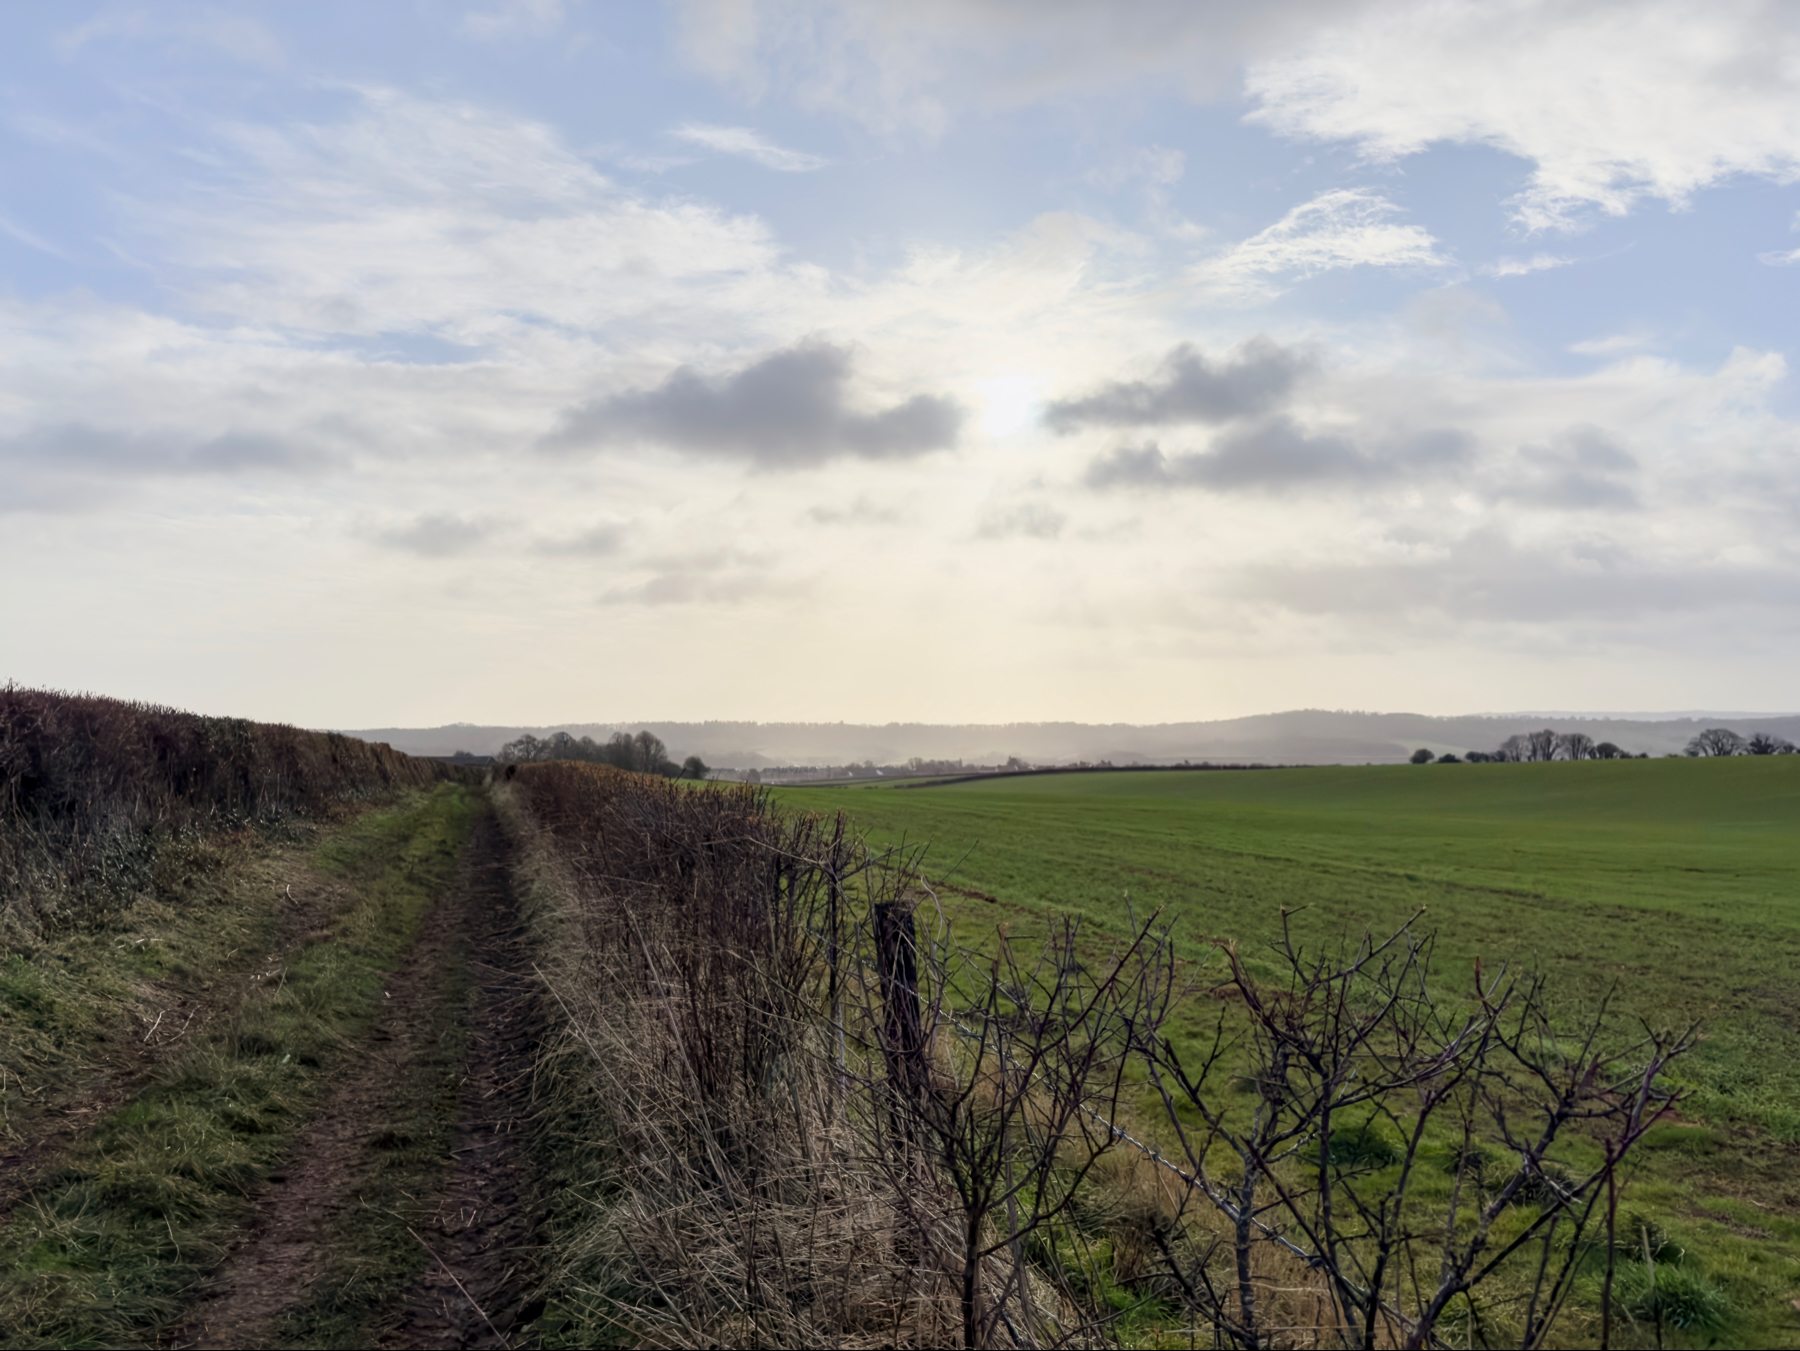 A rural landscape with a narrow dirt path between hedge rows, green fields under a cloudy sky.